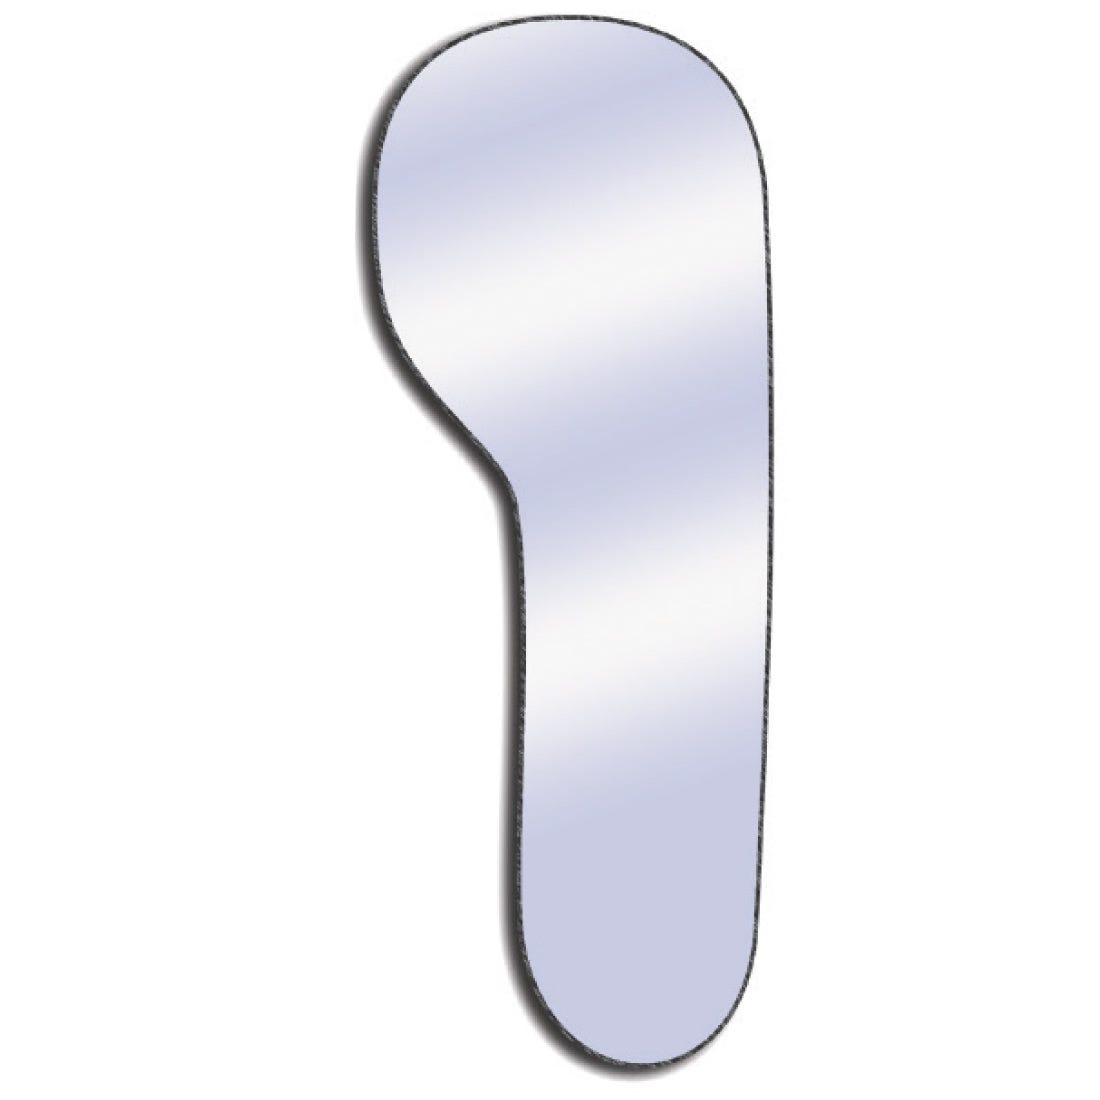 ACE Narrow Lingual Intraoral Photo Mirror -Adult #6- double sided